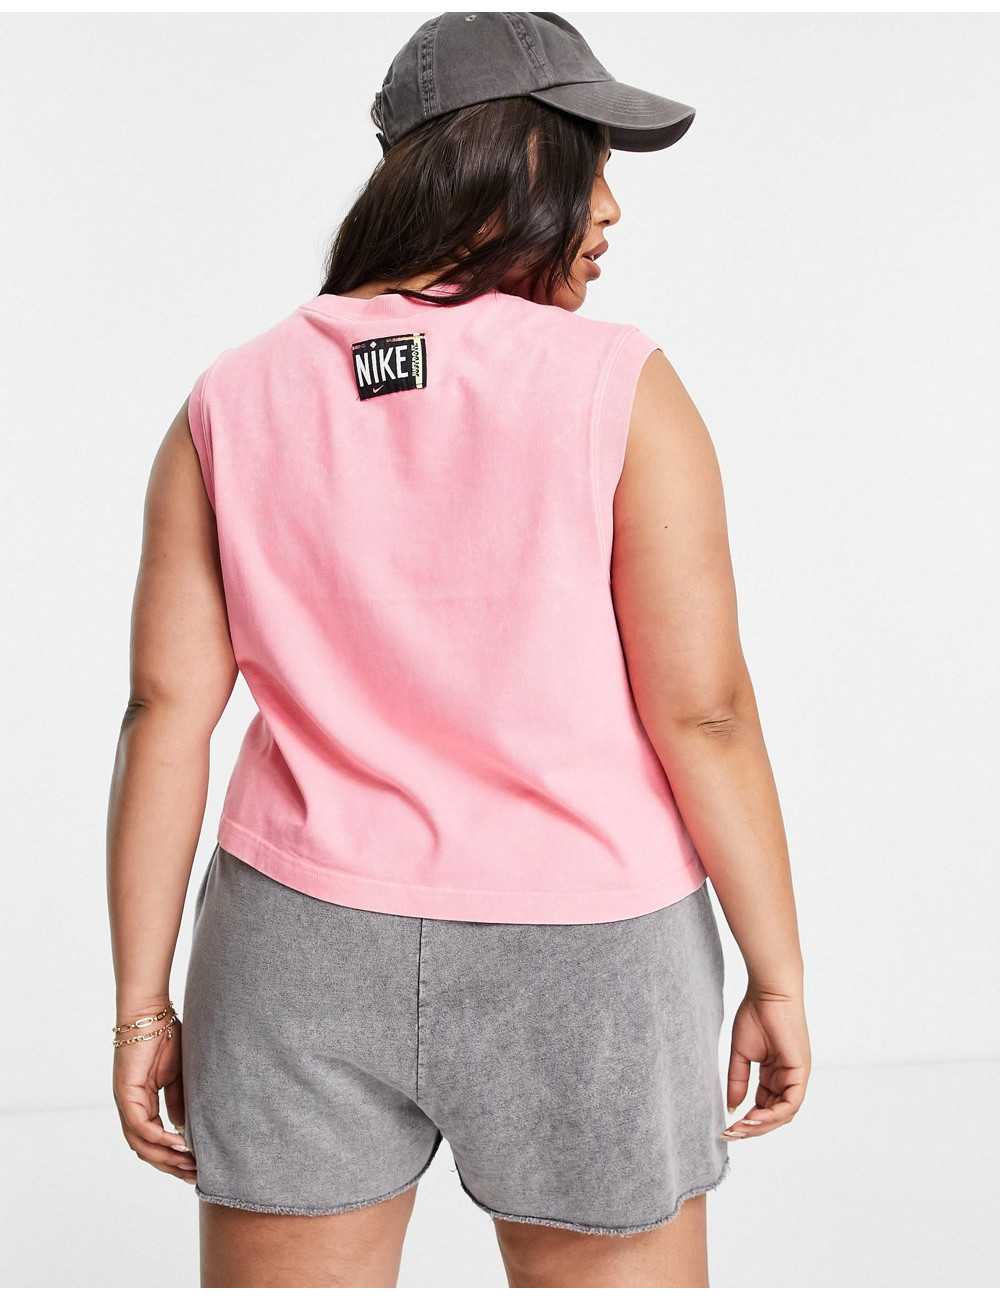 Nike Plus washed vest in...